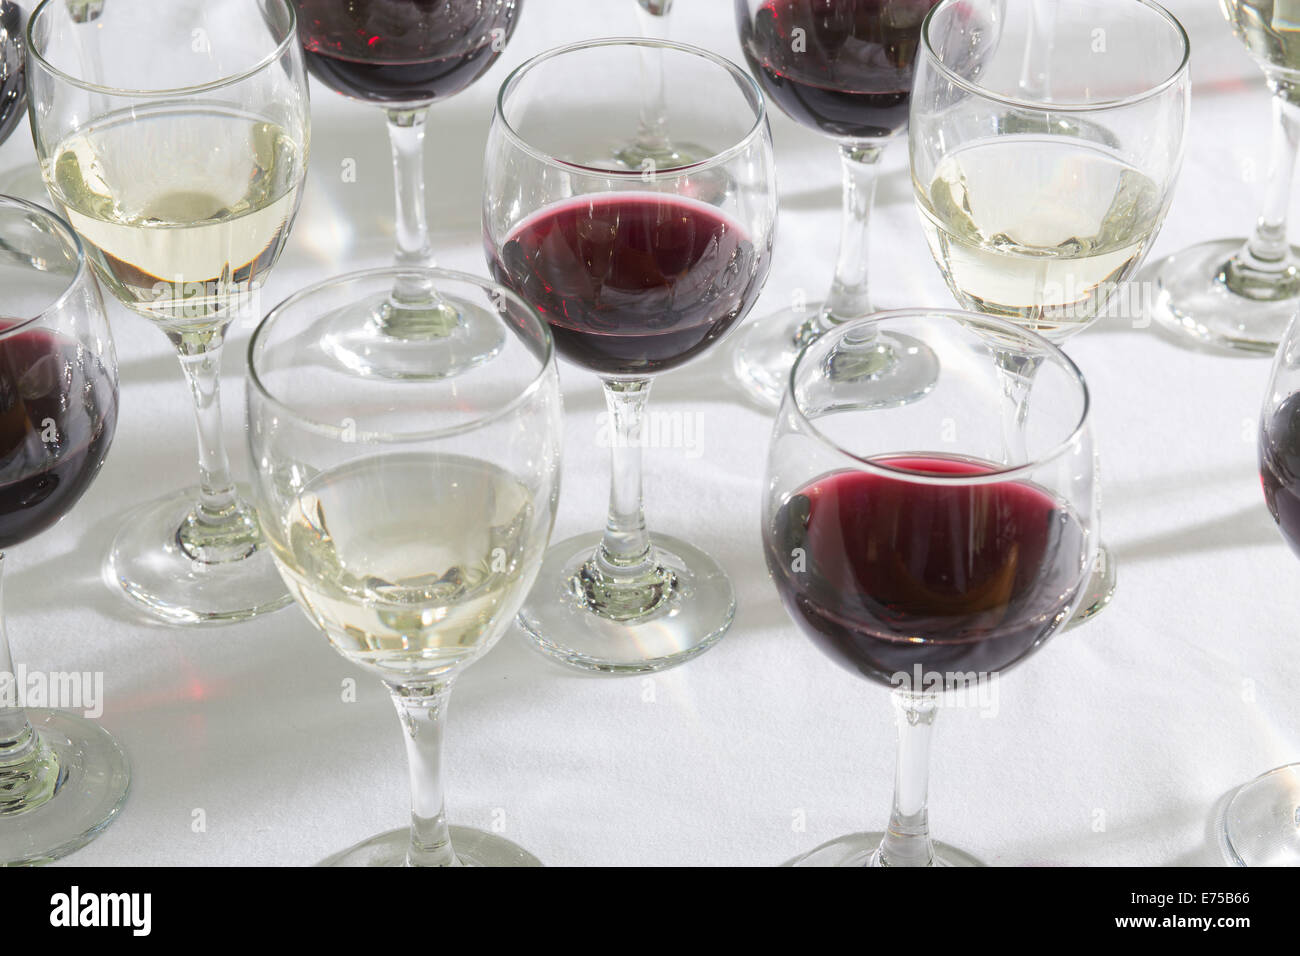 An array of wine glasses filled with different wines. Stock Photo